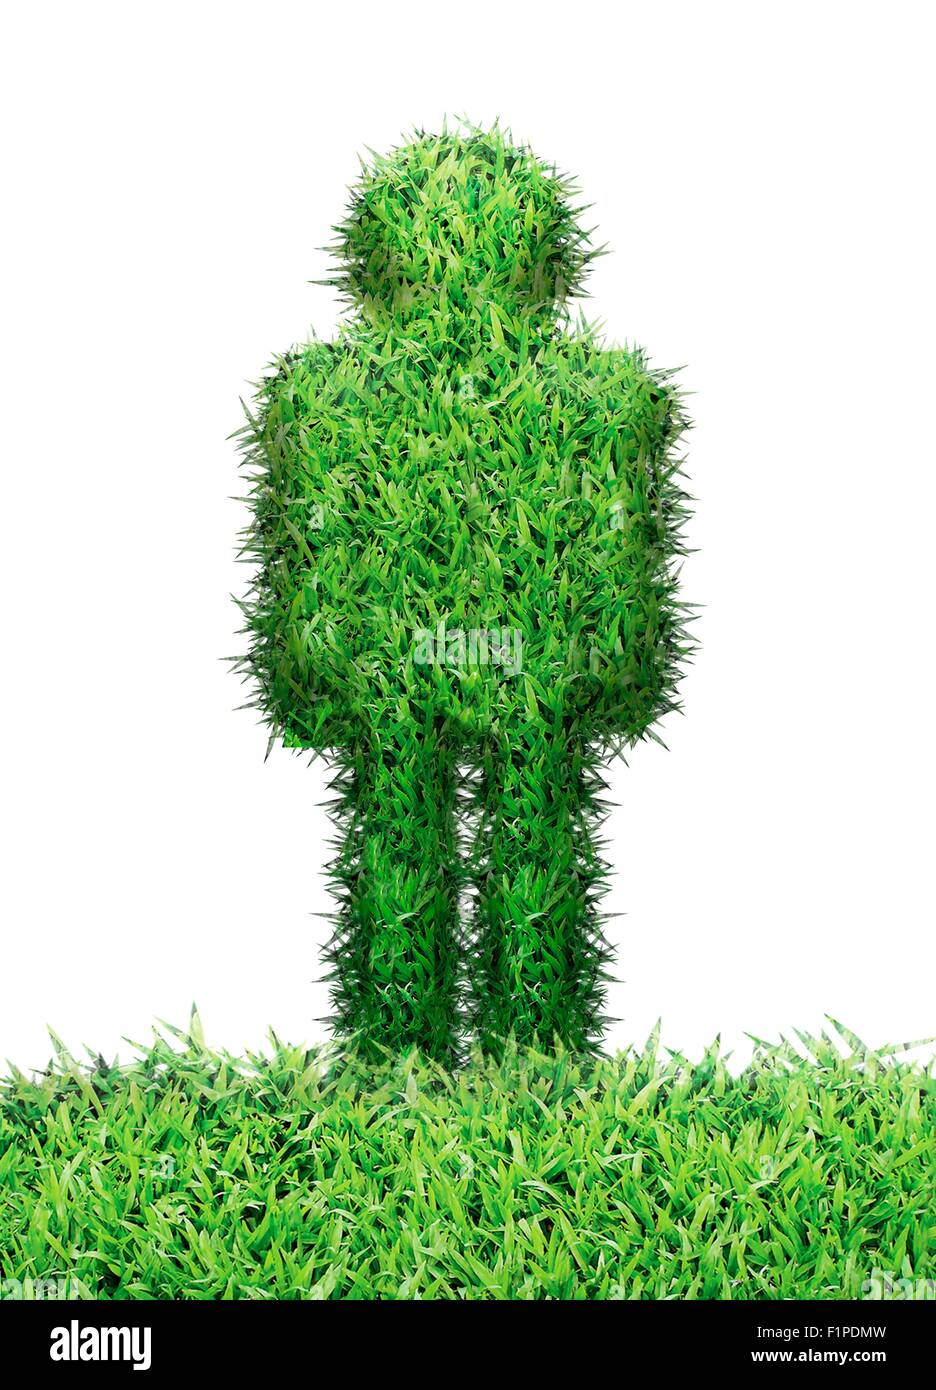 Human figure made from grass, computer illustration. Stock Photo